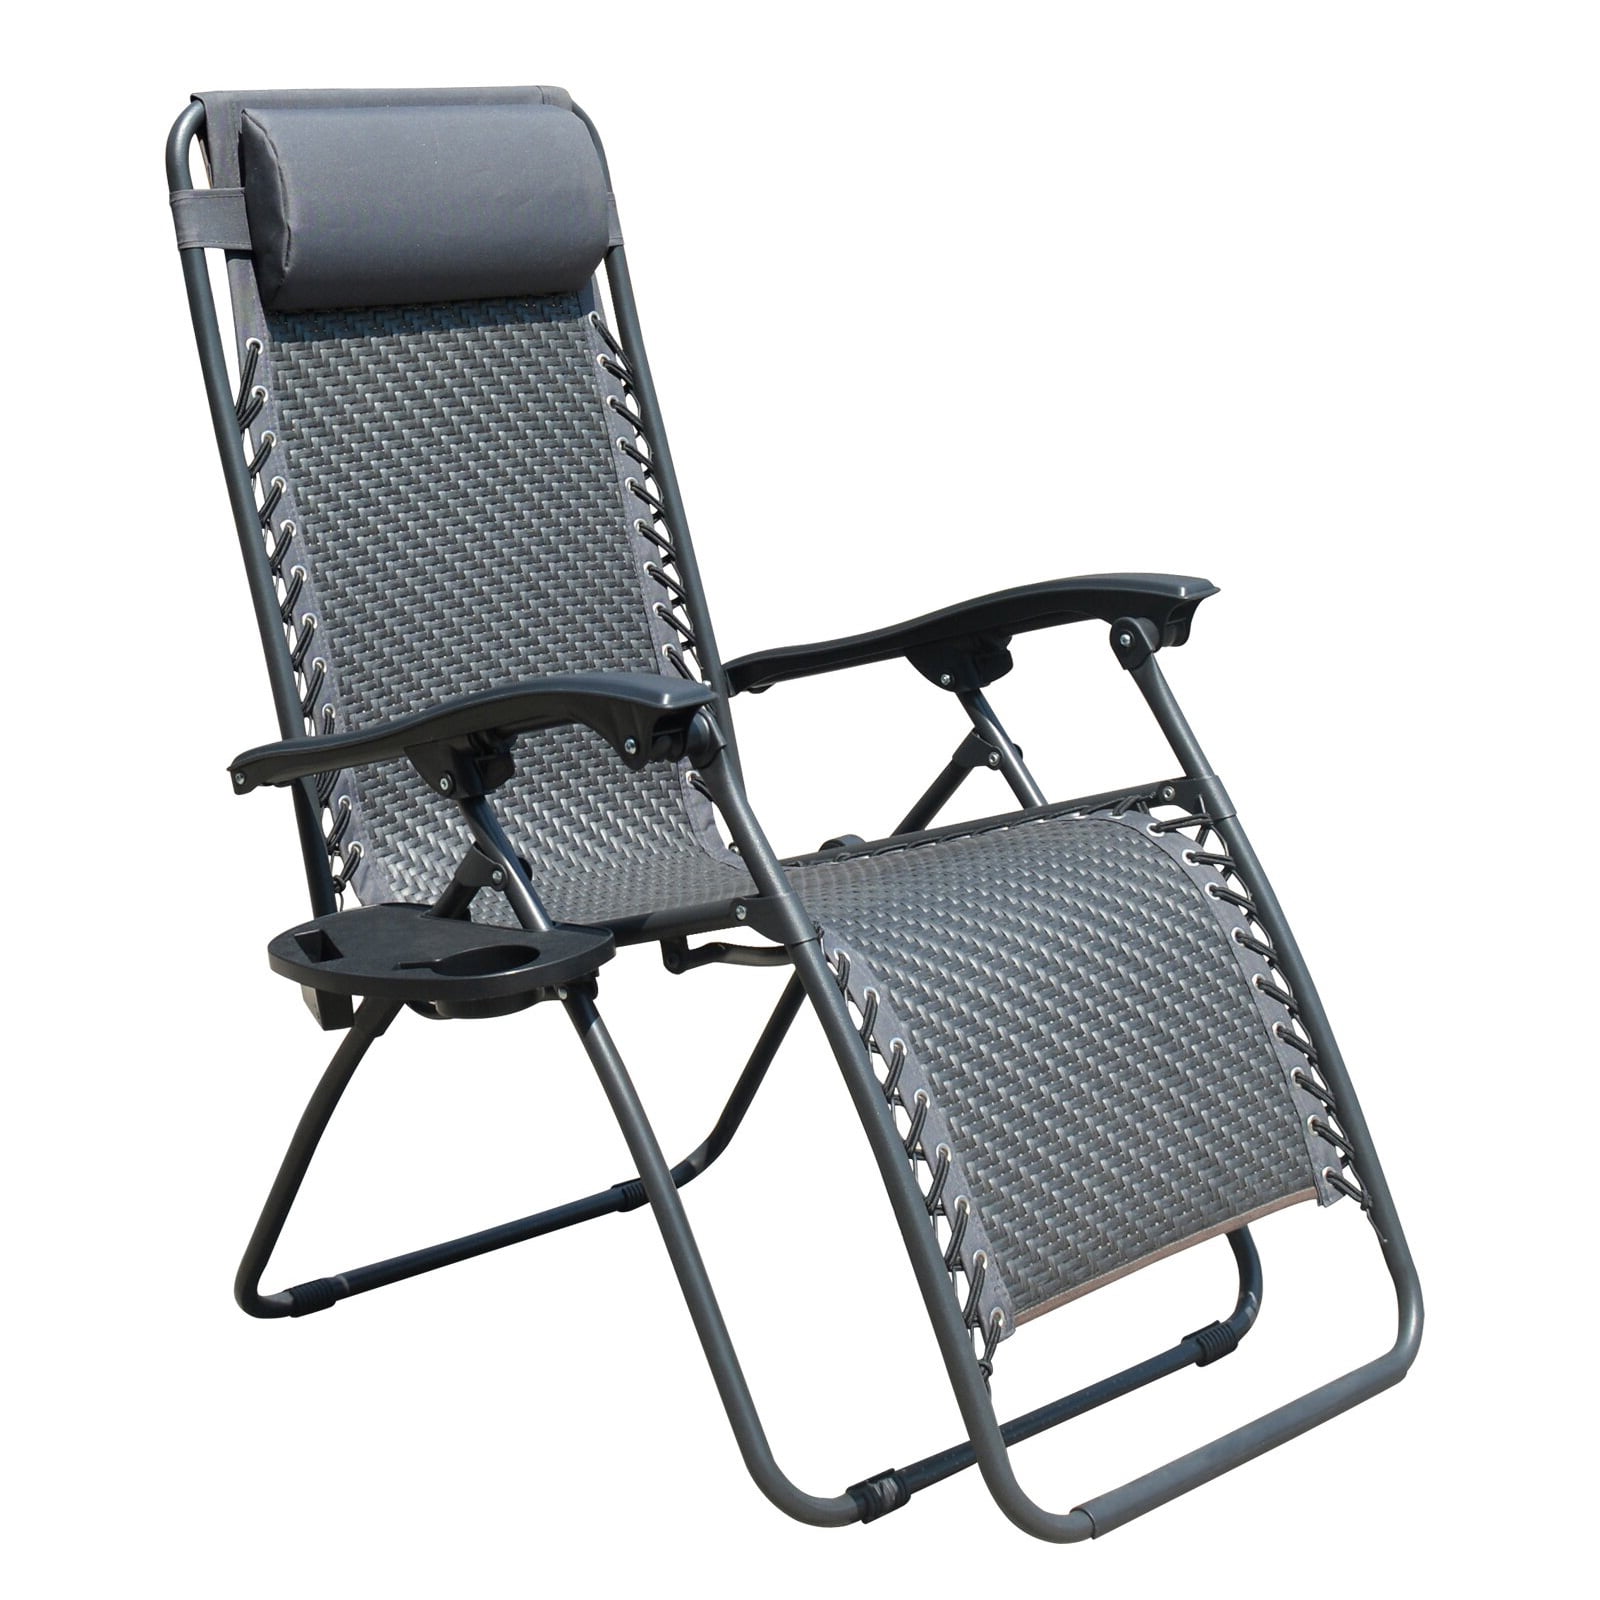 Yard Patio 1 Beach DORTALA Rattan Zero Gravity Chair Heavy Duty Wicker Chaise Folding Recliner for Pool Outdoor Adjustable Folding Lounge Chair with Widened Armrest /& Locking System